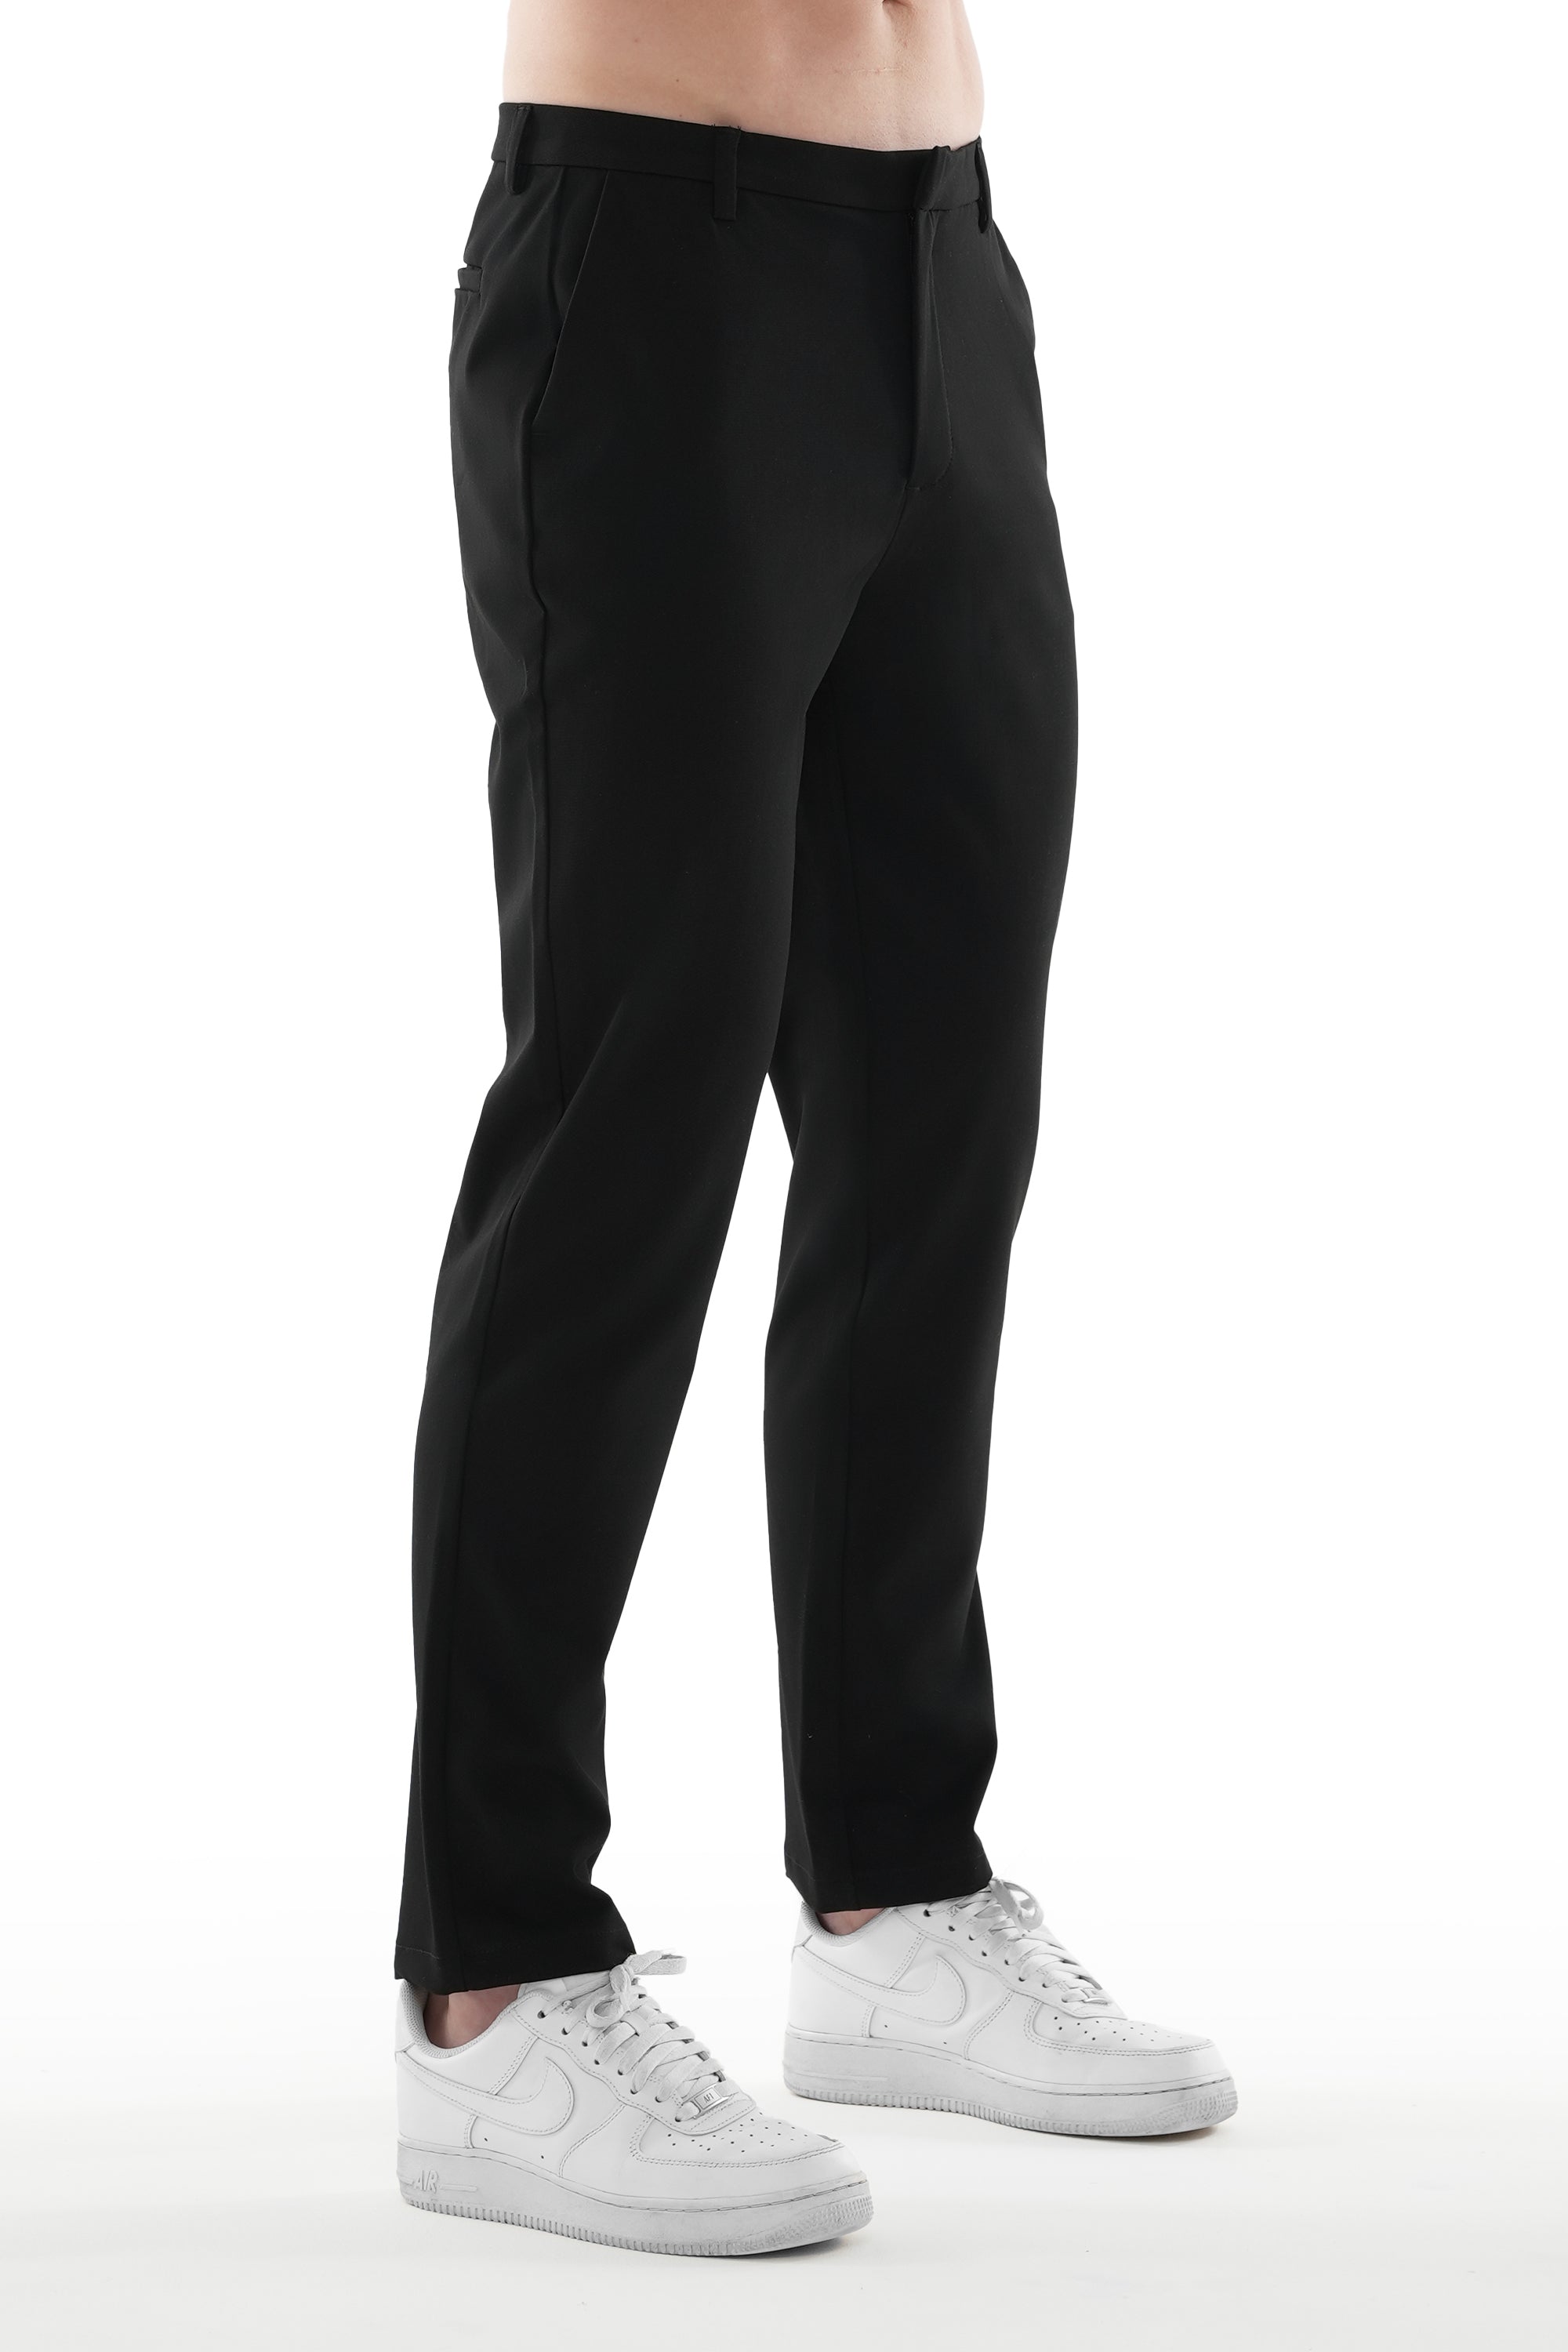 THE LUCIA TROUSERS - BLACK